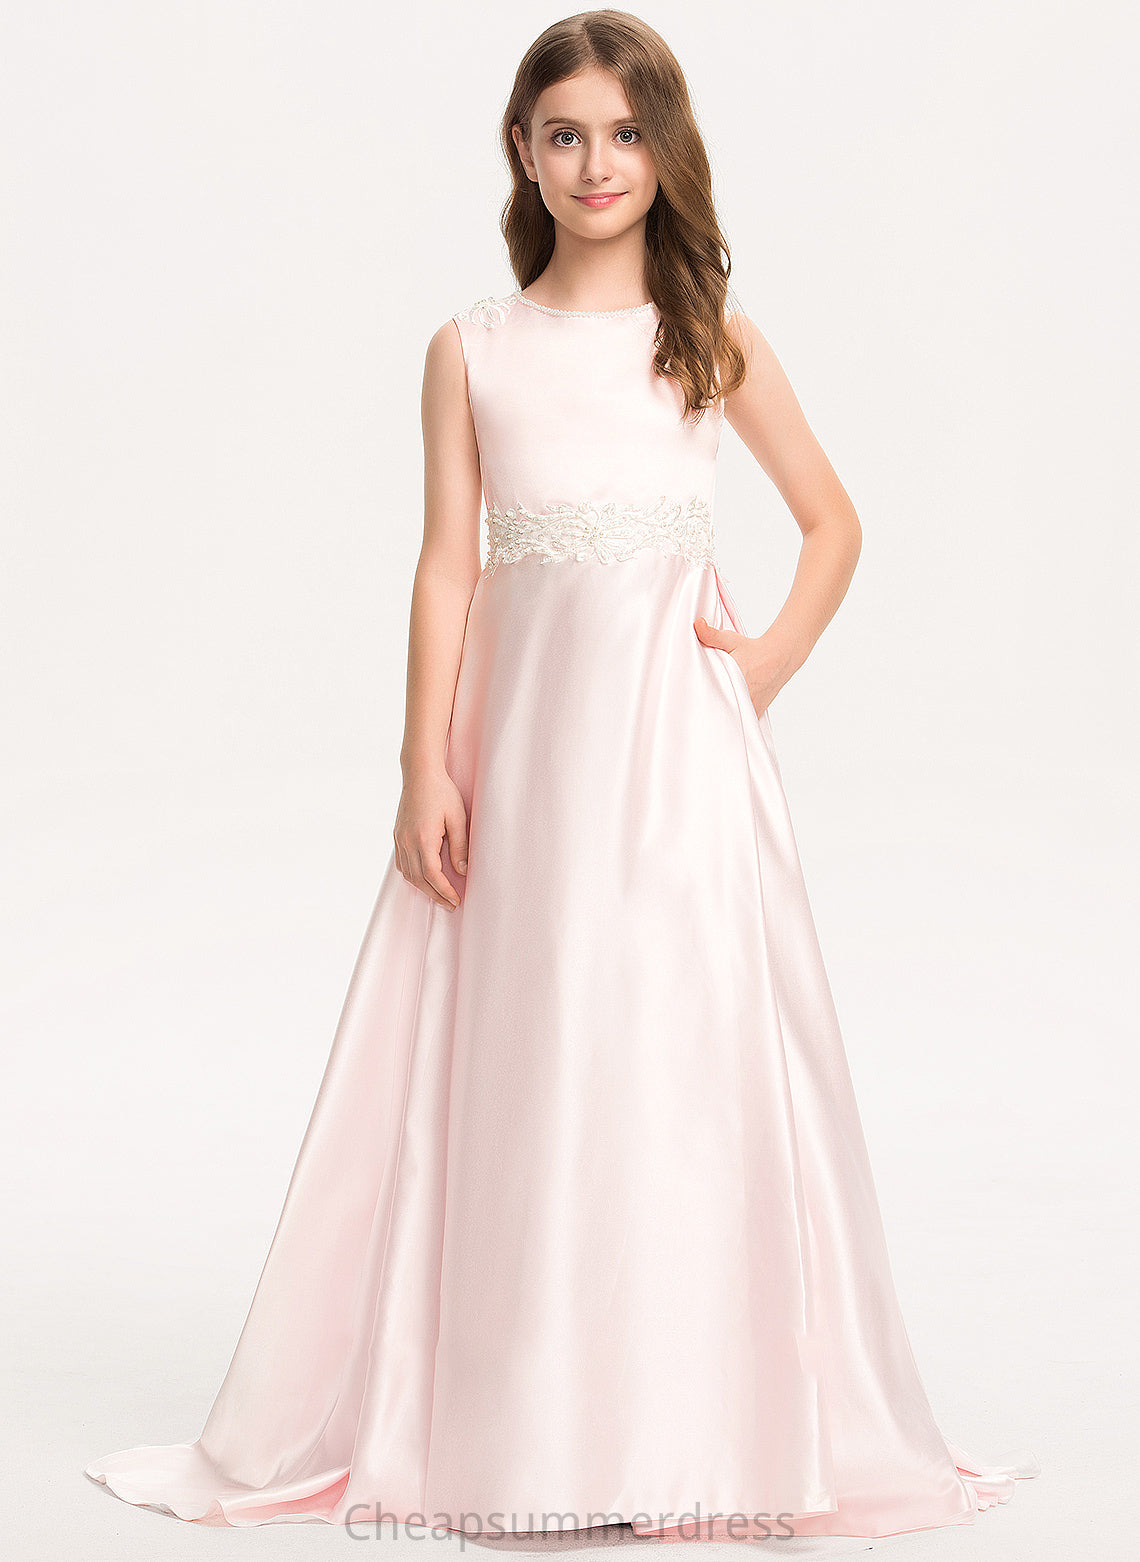 Lace Sweep Bow(s) With Lydia Junior Bridesmaid Dresses Neck Scoop A-Line Pockets Satin Train